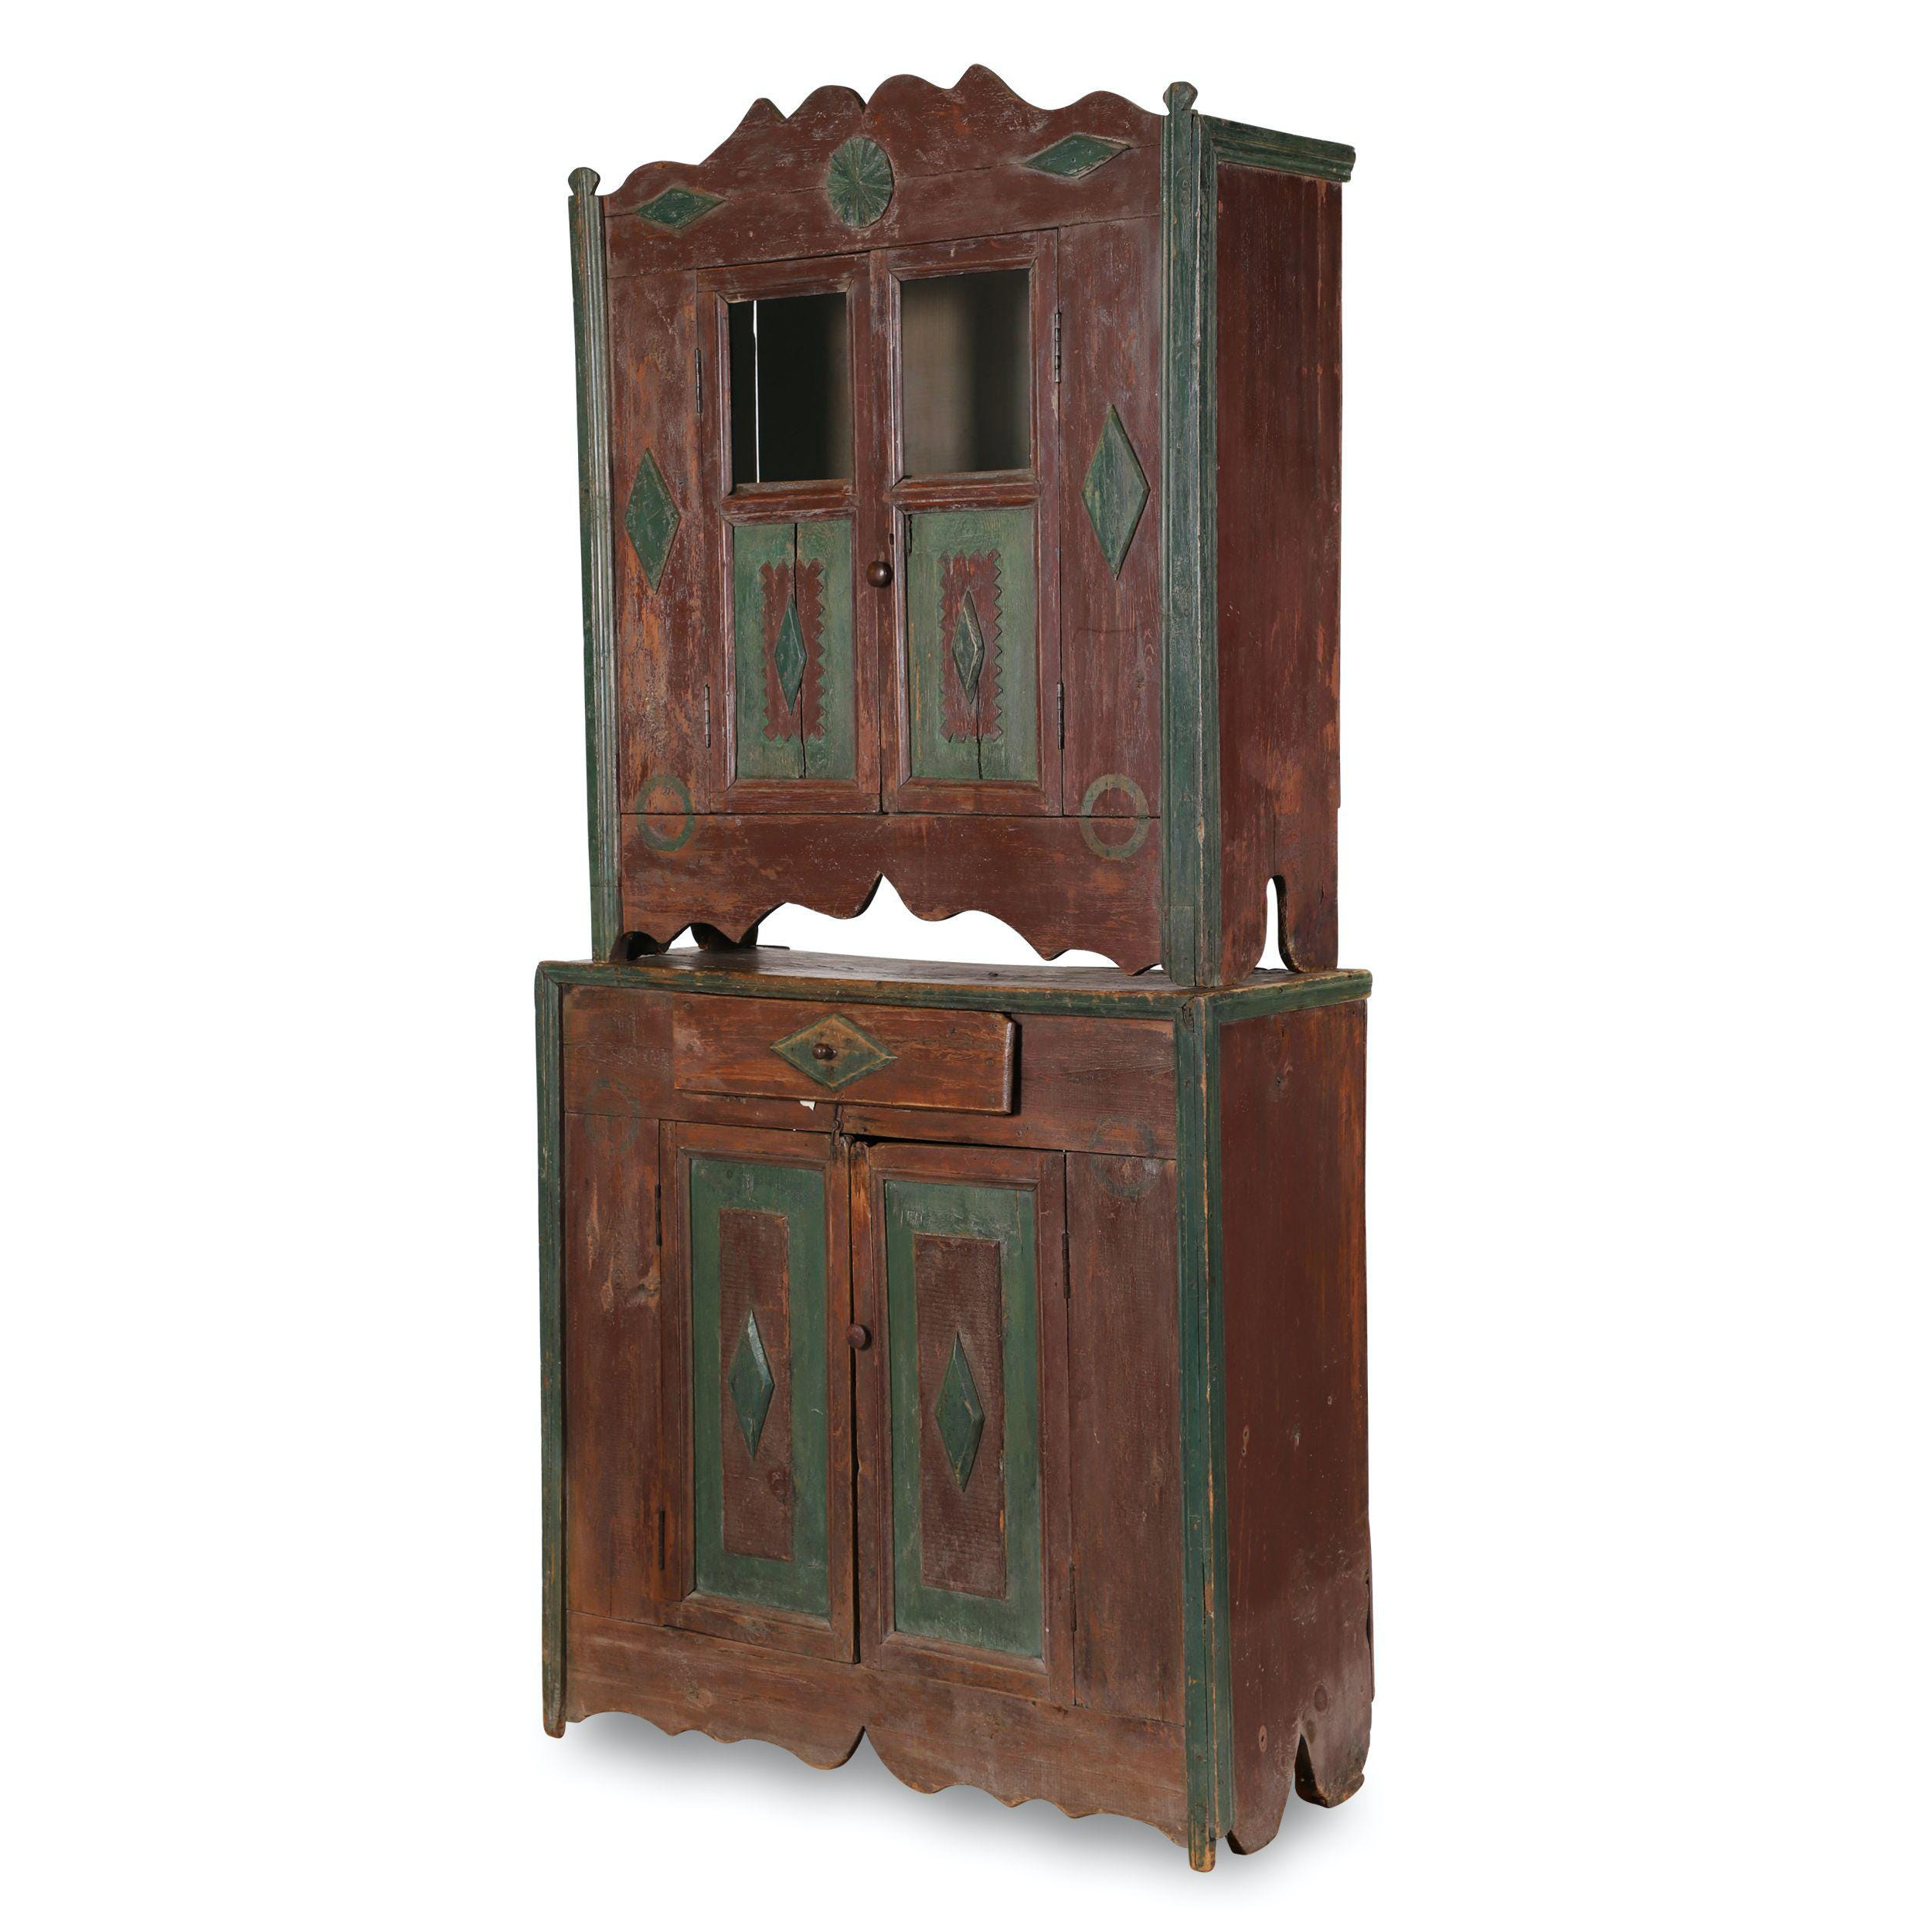 Western Canada Ukrainian two-piece cupboard in the original burgundy red paint with green Highlights, estimated at $2,000-$3,000.